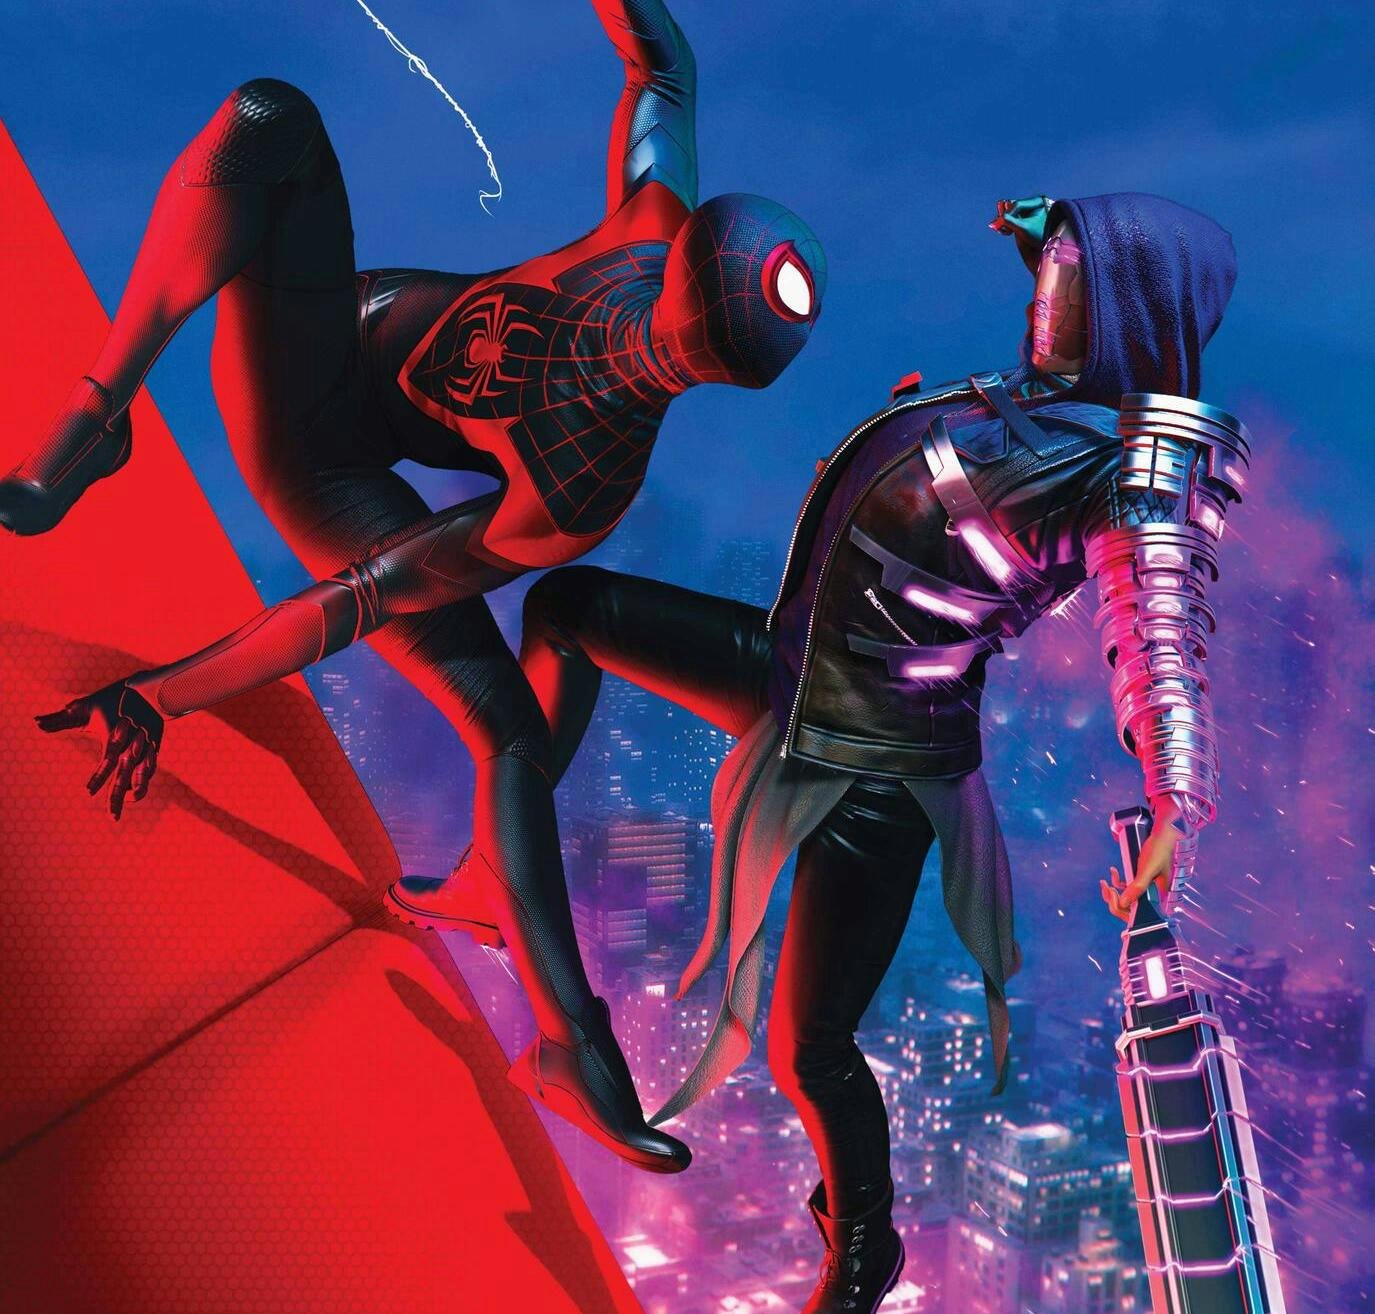 Marvel's Spider-Man 2' Explained: Who Is Spider-Man (Miles Morales)?